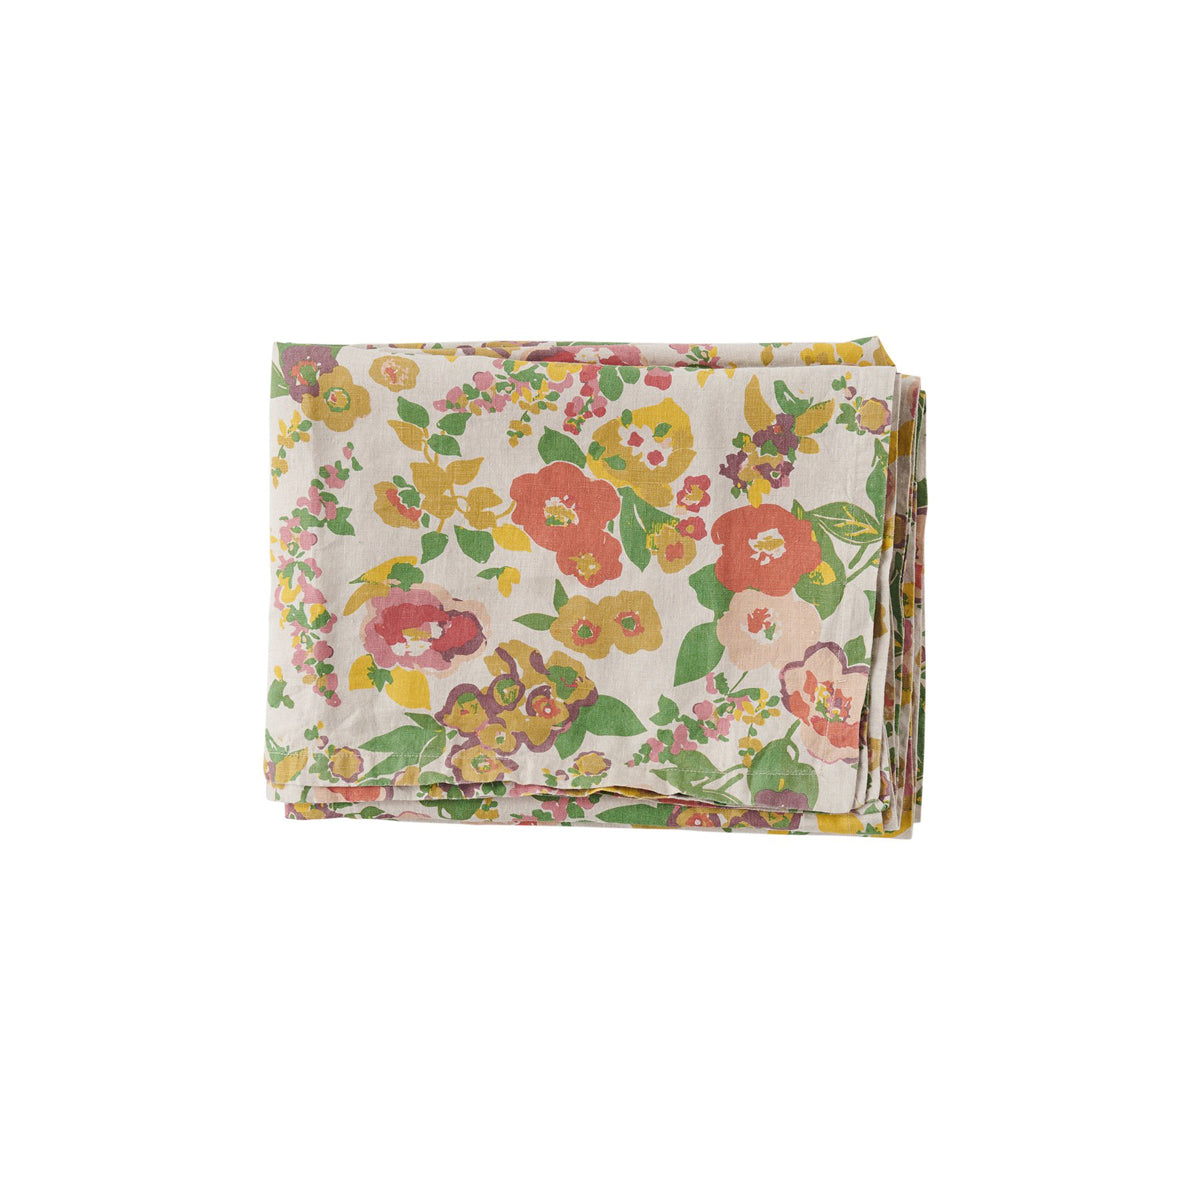 Society of Wanderers Marianne Floral Linen Napkin set